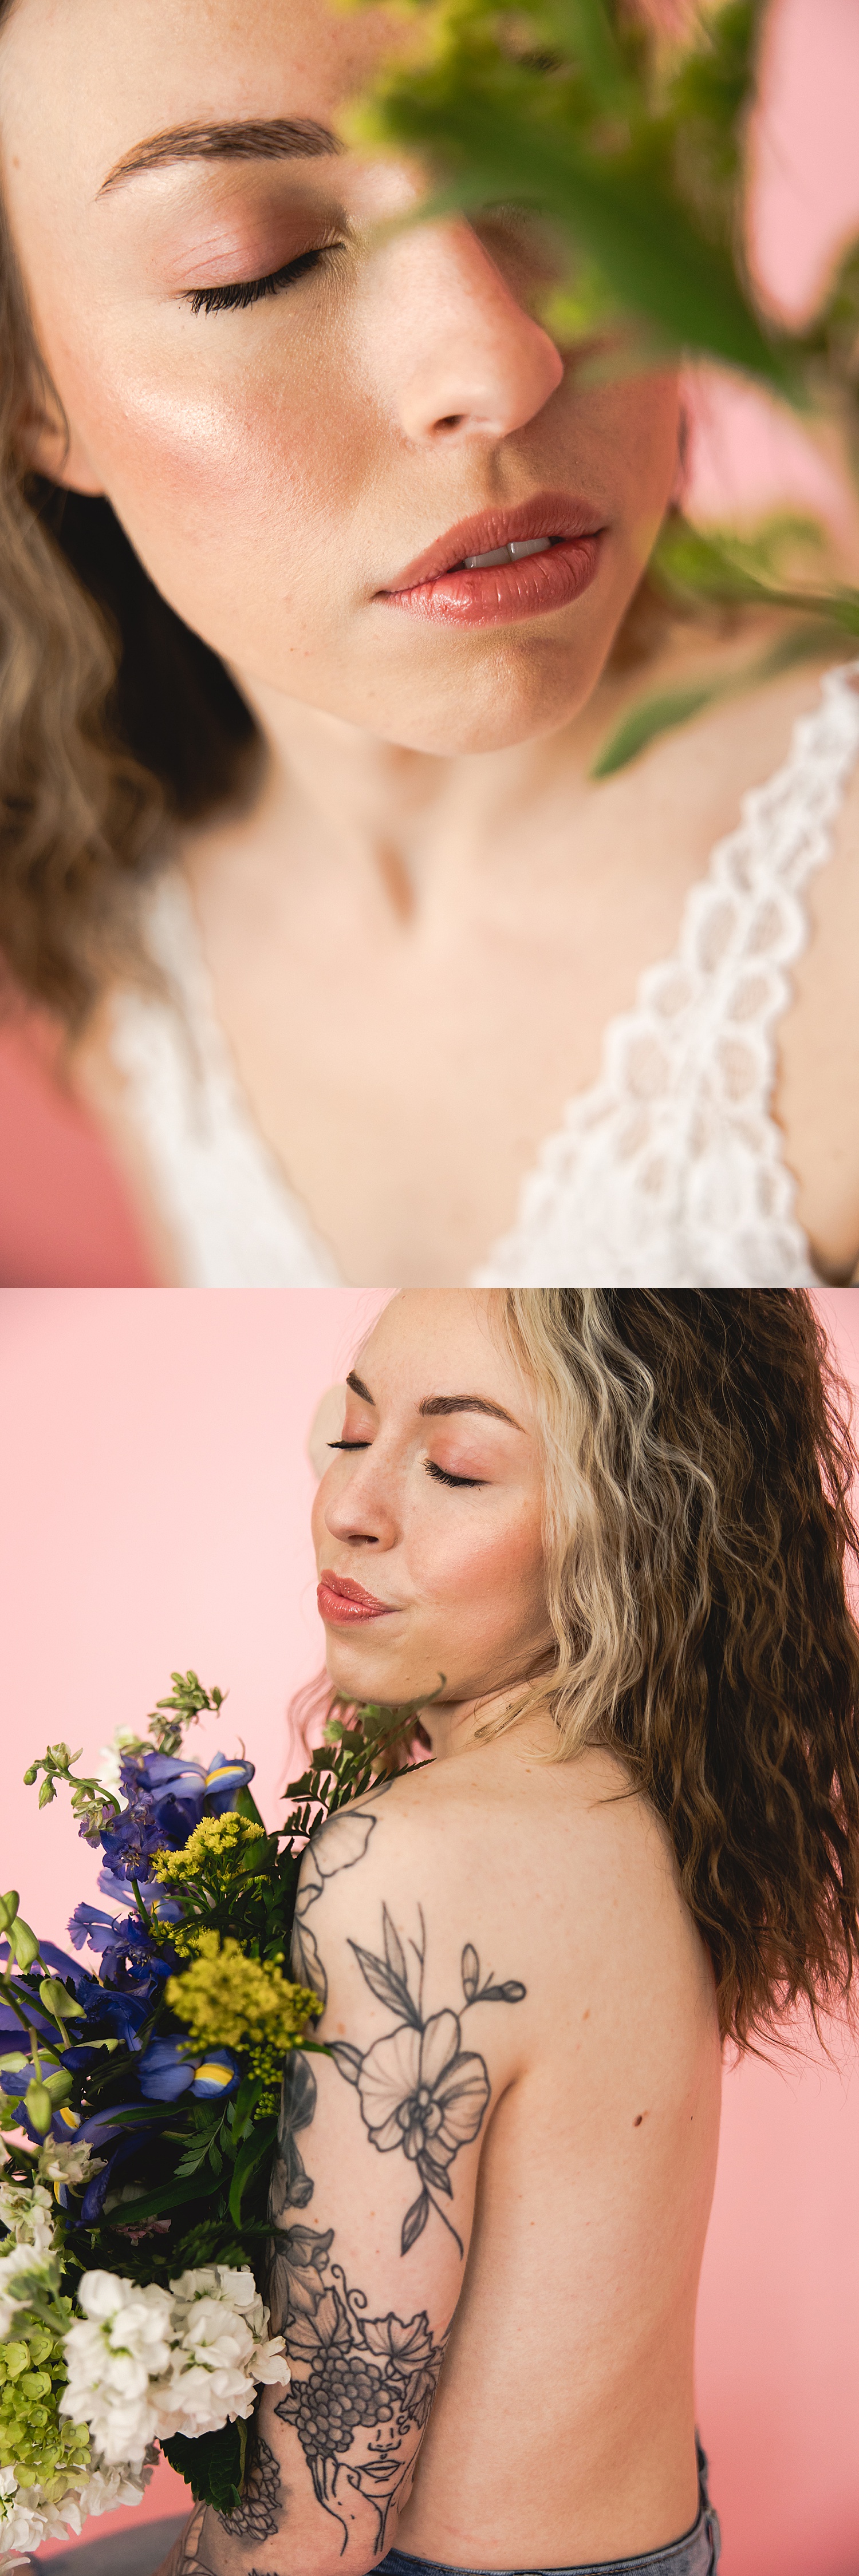 woman utilizing flowers during boudoir session is one of 10 reasons to get a boudoir shoot 